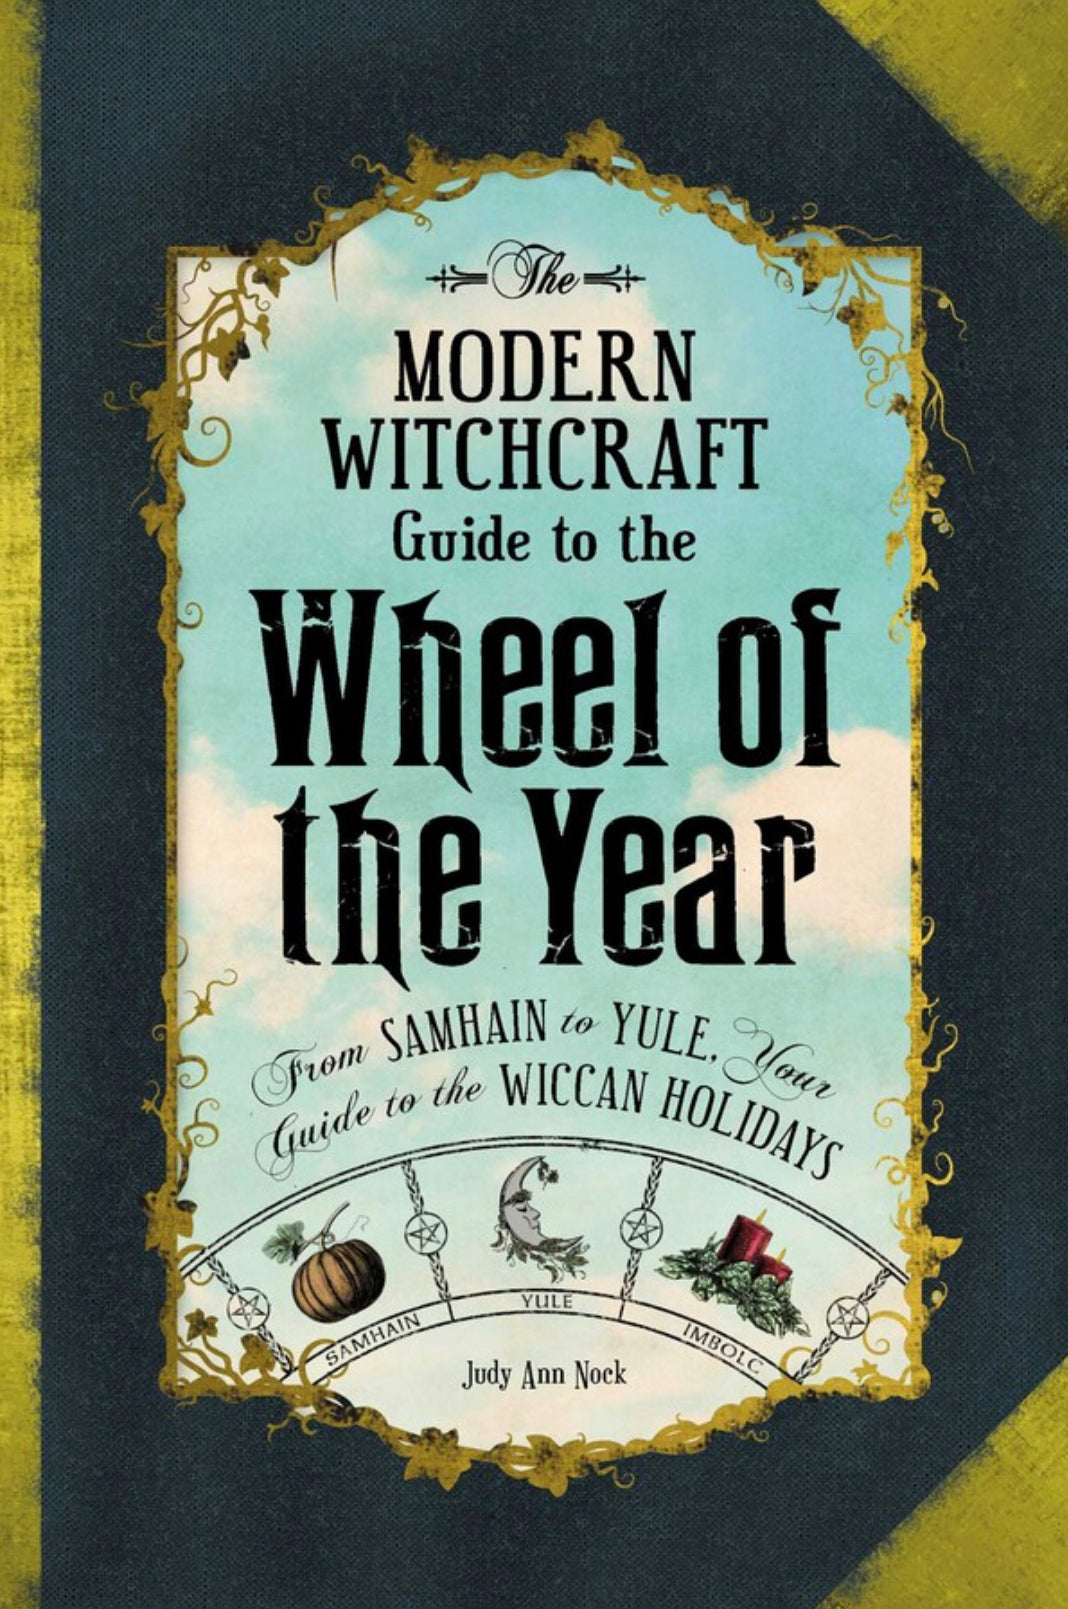 modern witchcraft guide to the wheel of the year by Skye Alexander